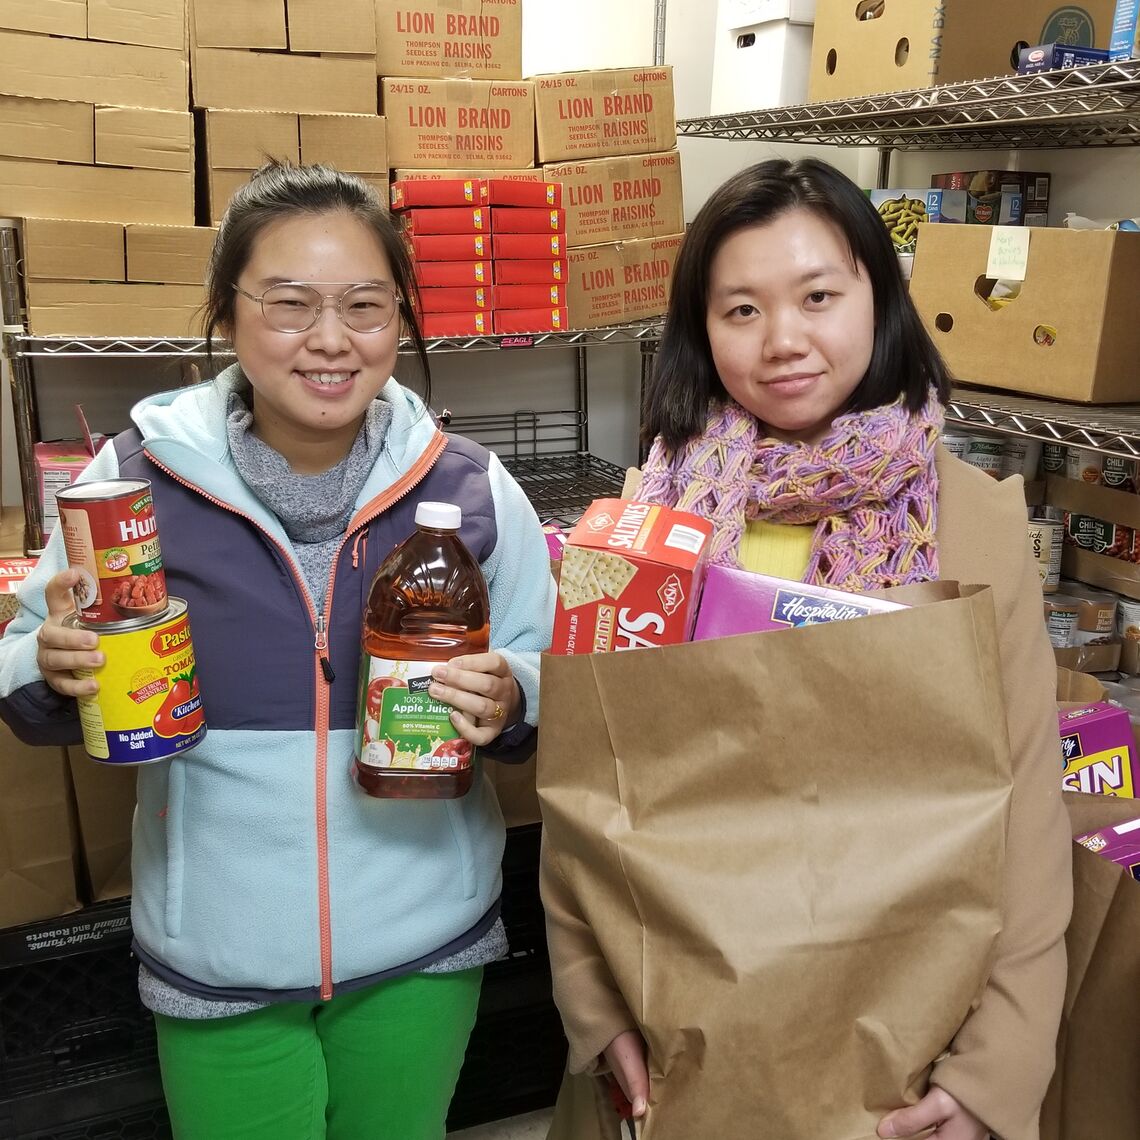 Daisy and Summer standing in food pantry holding food items